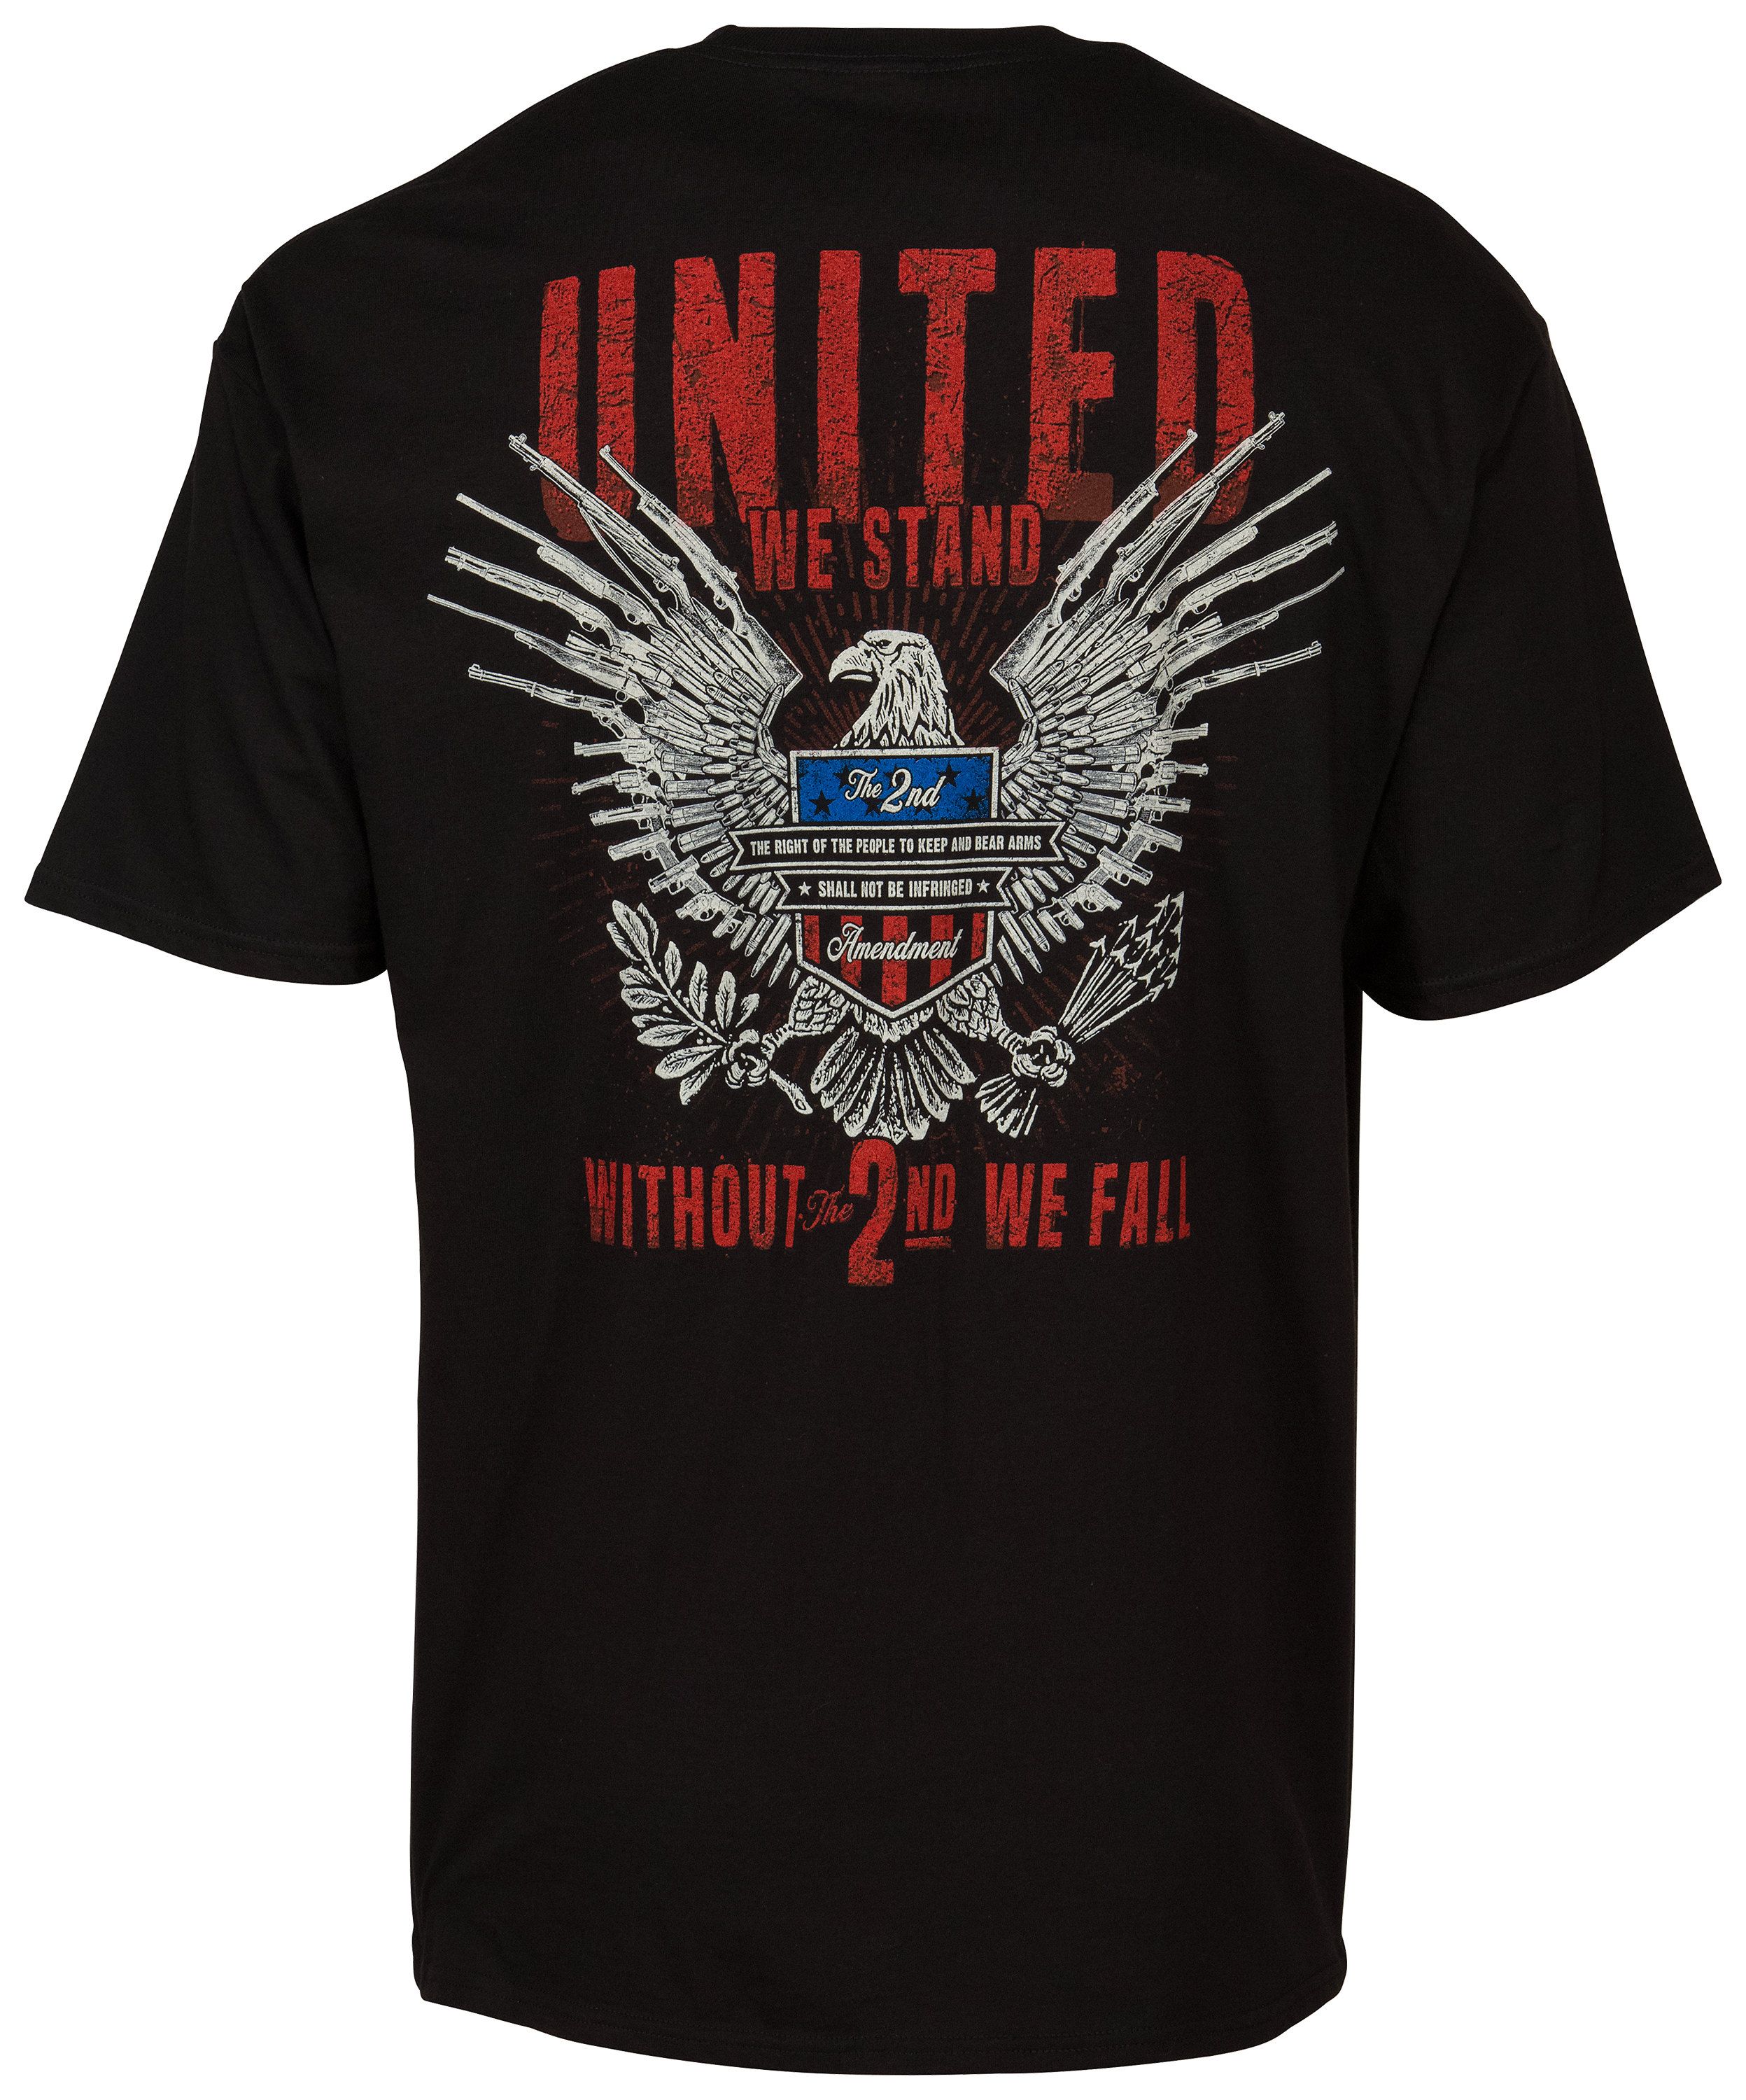 Bass Pro Shops United We Stand Graphic Short-Sleeve T-Shirt for